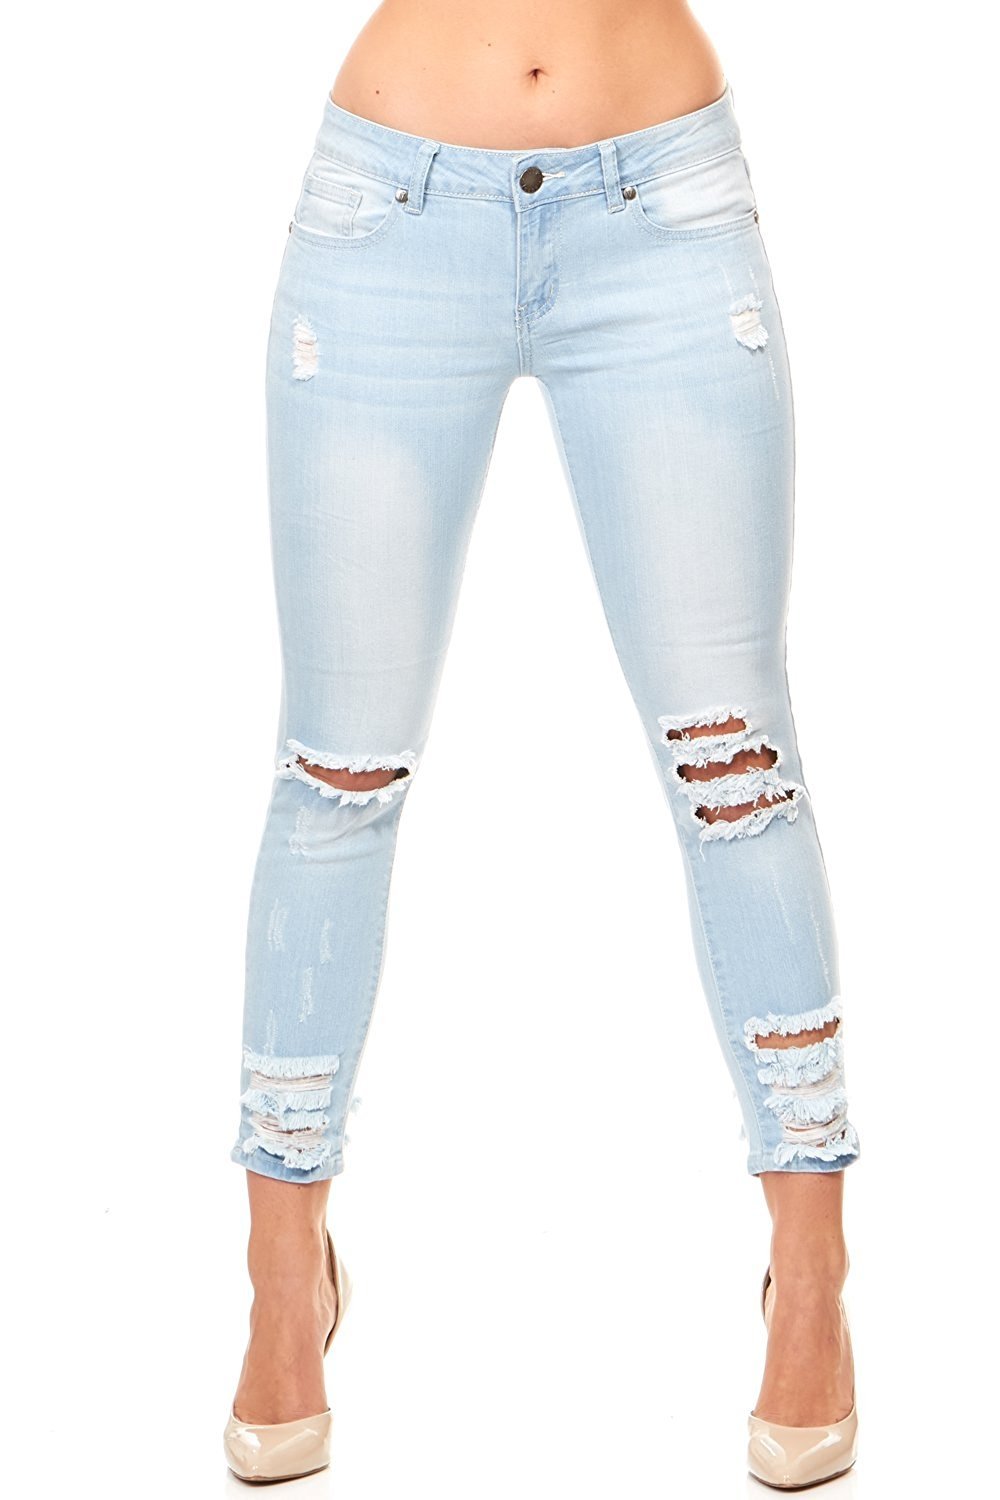 VIP Jeans Ripped Distressed Skinny jeans for women Junior / Plus size 5 ...